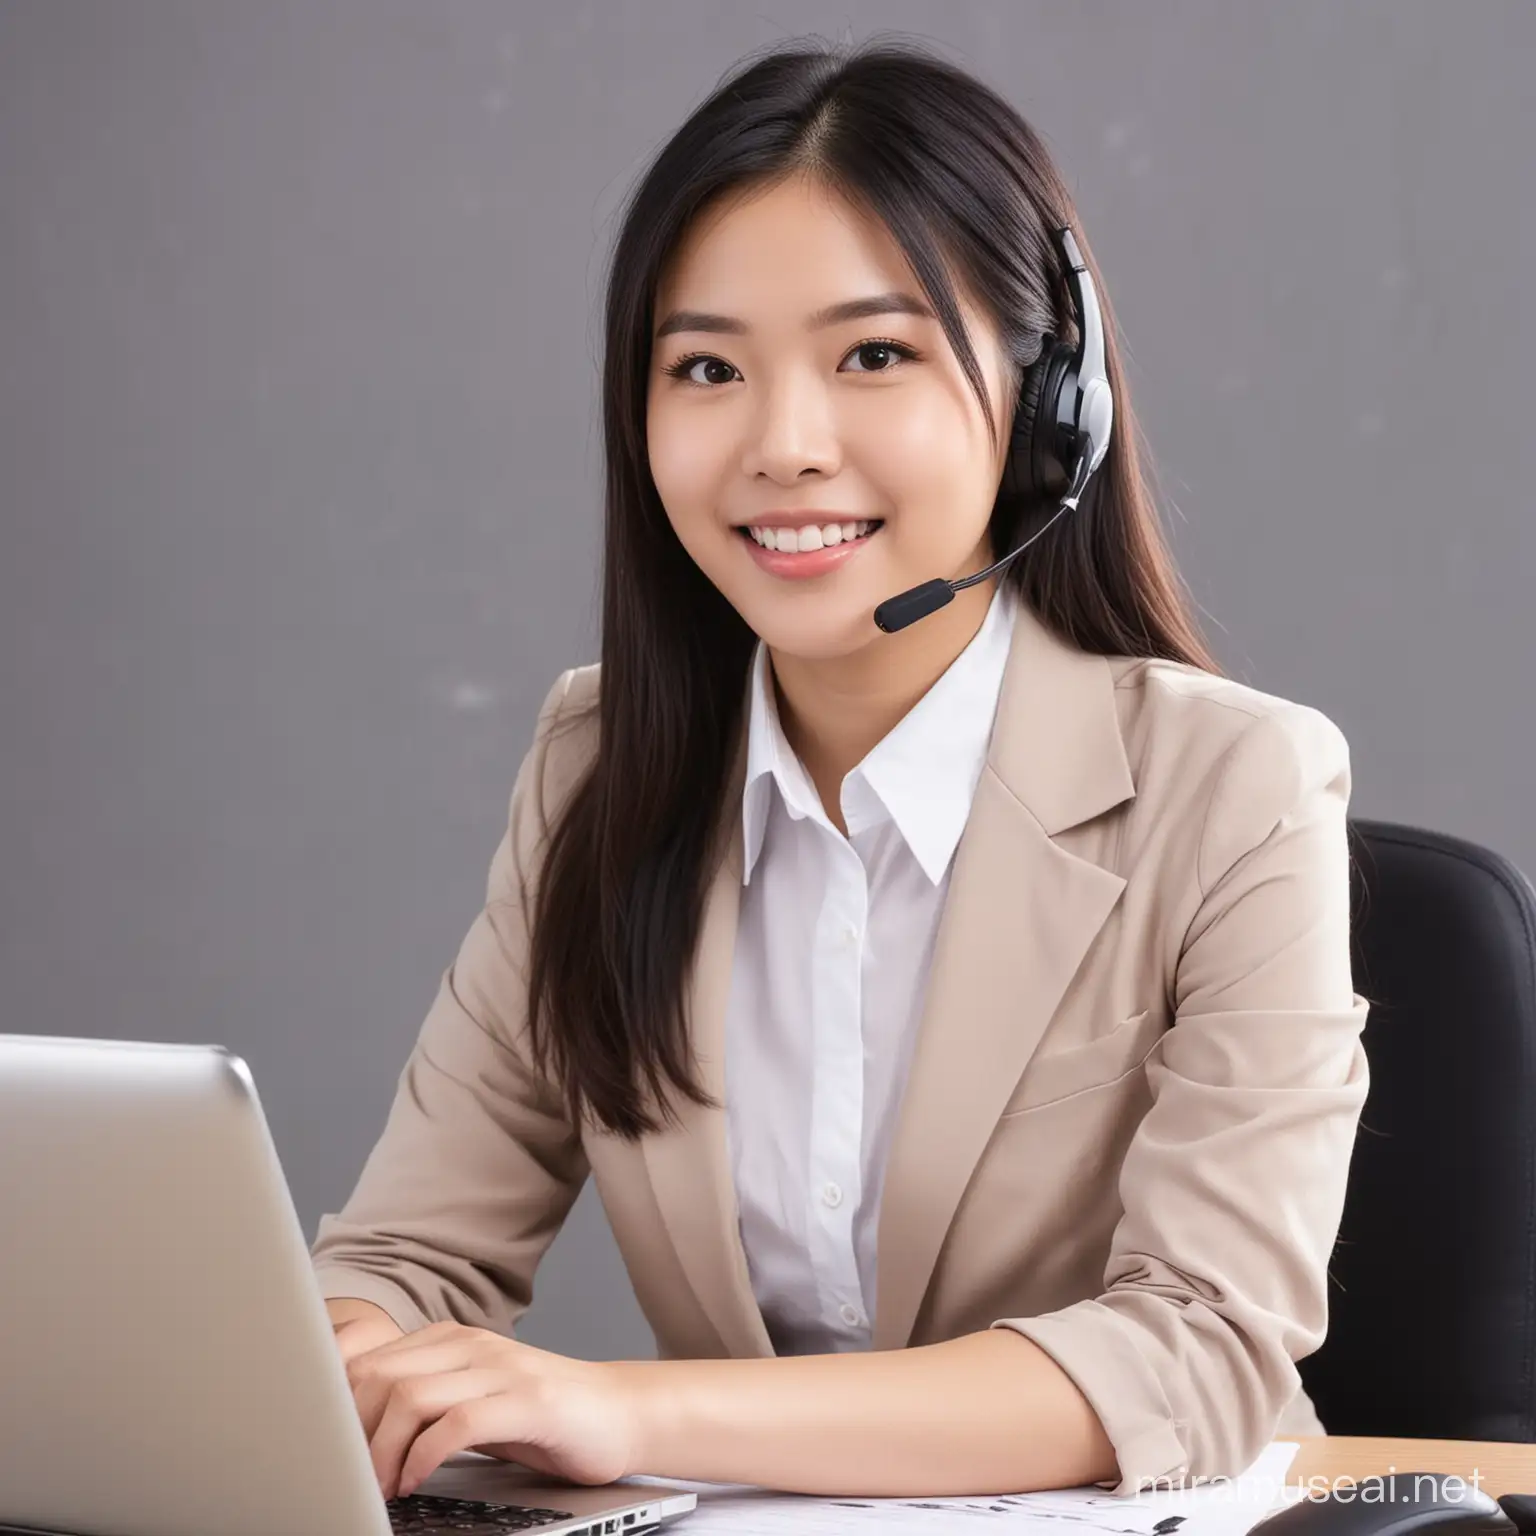 Professional Asian Girl Providing Financial Customer Service with Confidence